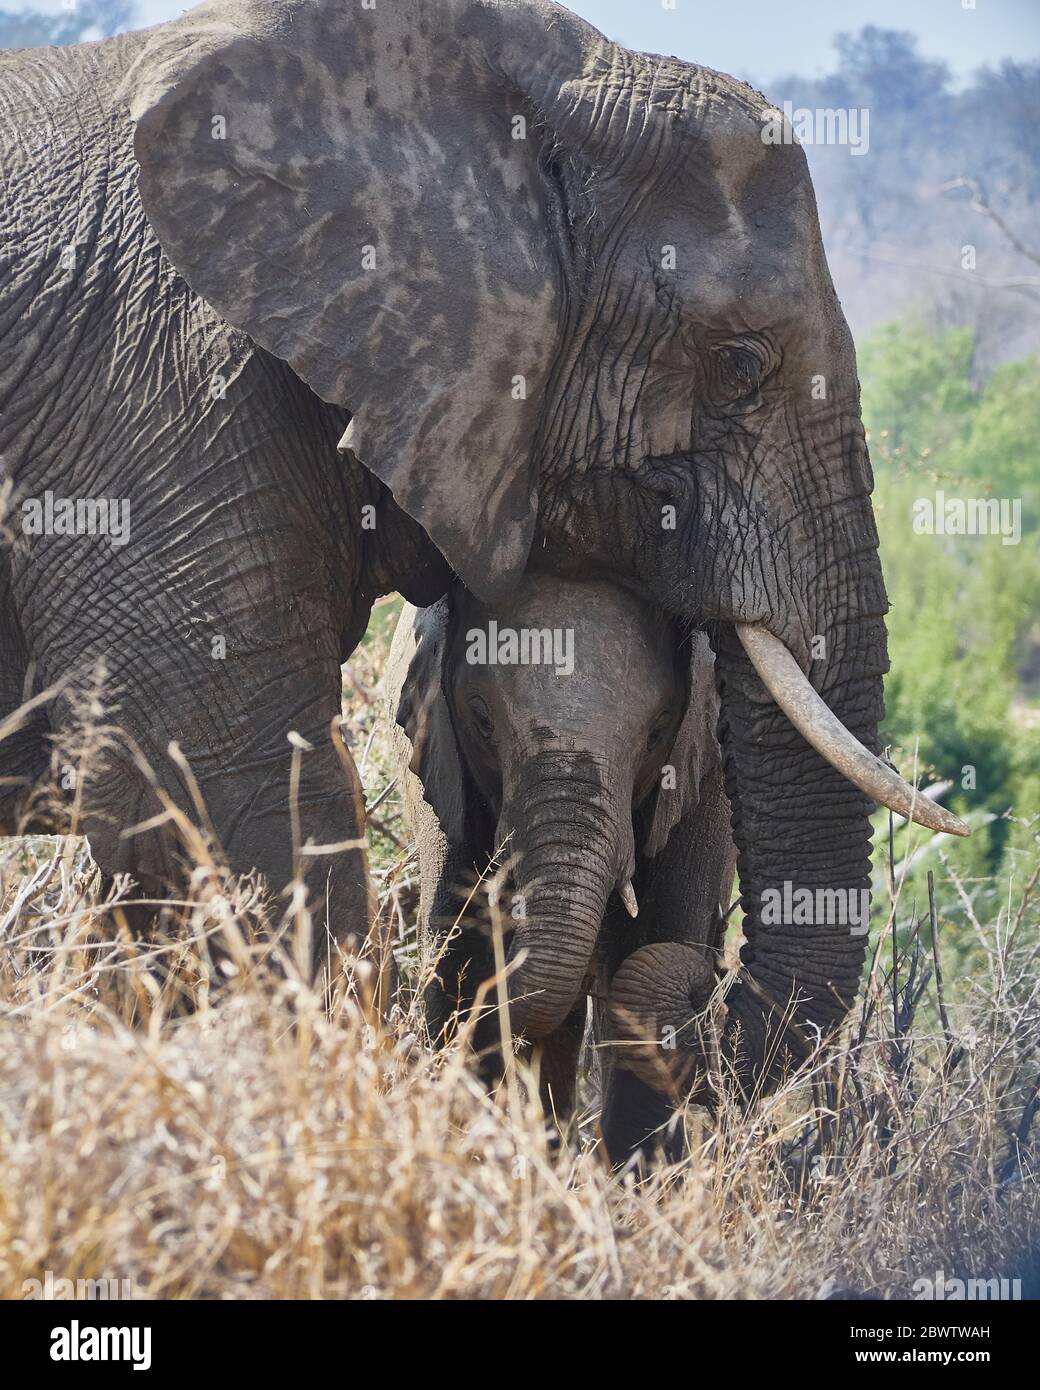 Portrait of a mother elephant and her baby, Kruger National Park, South Africa Stock Photo